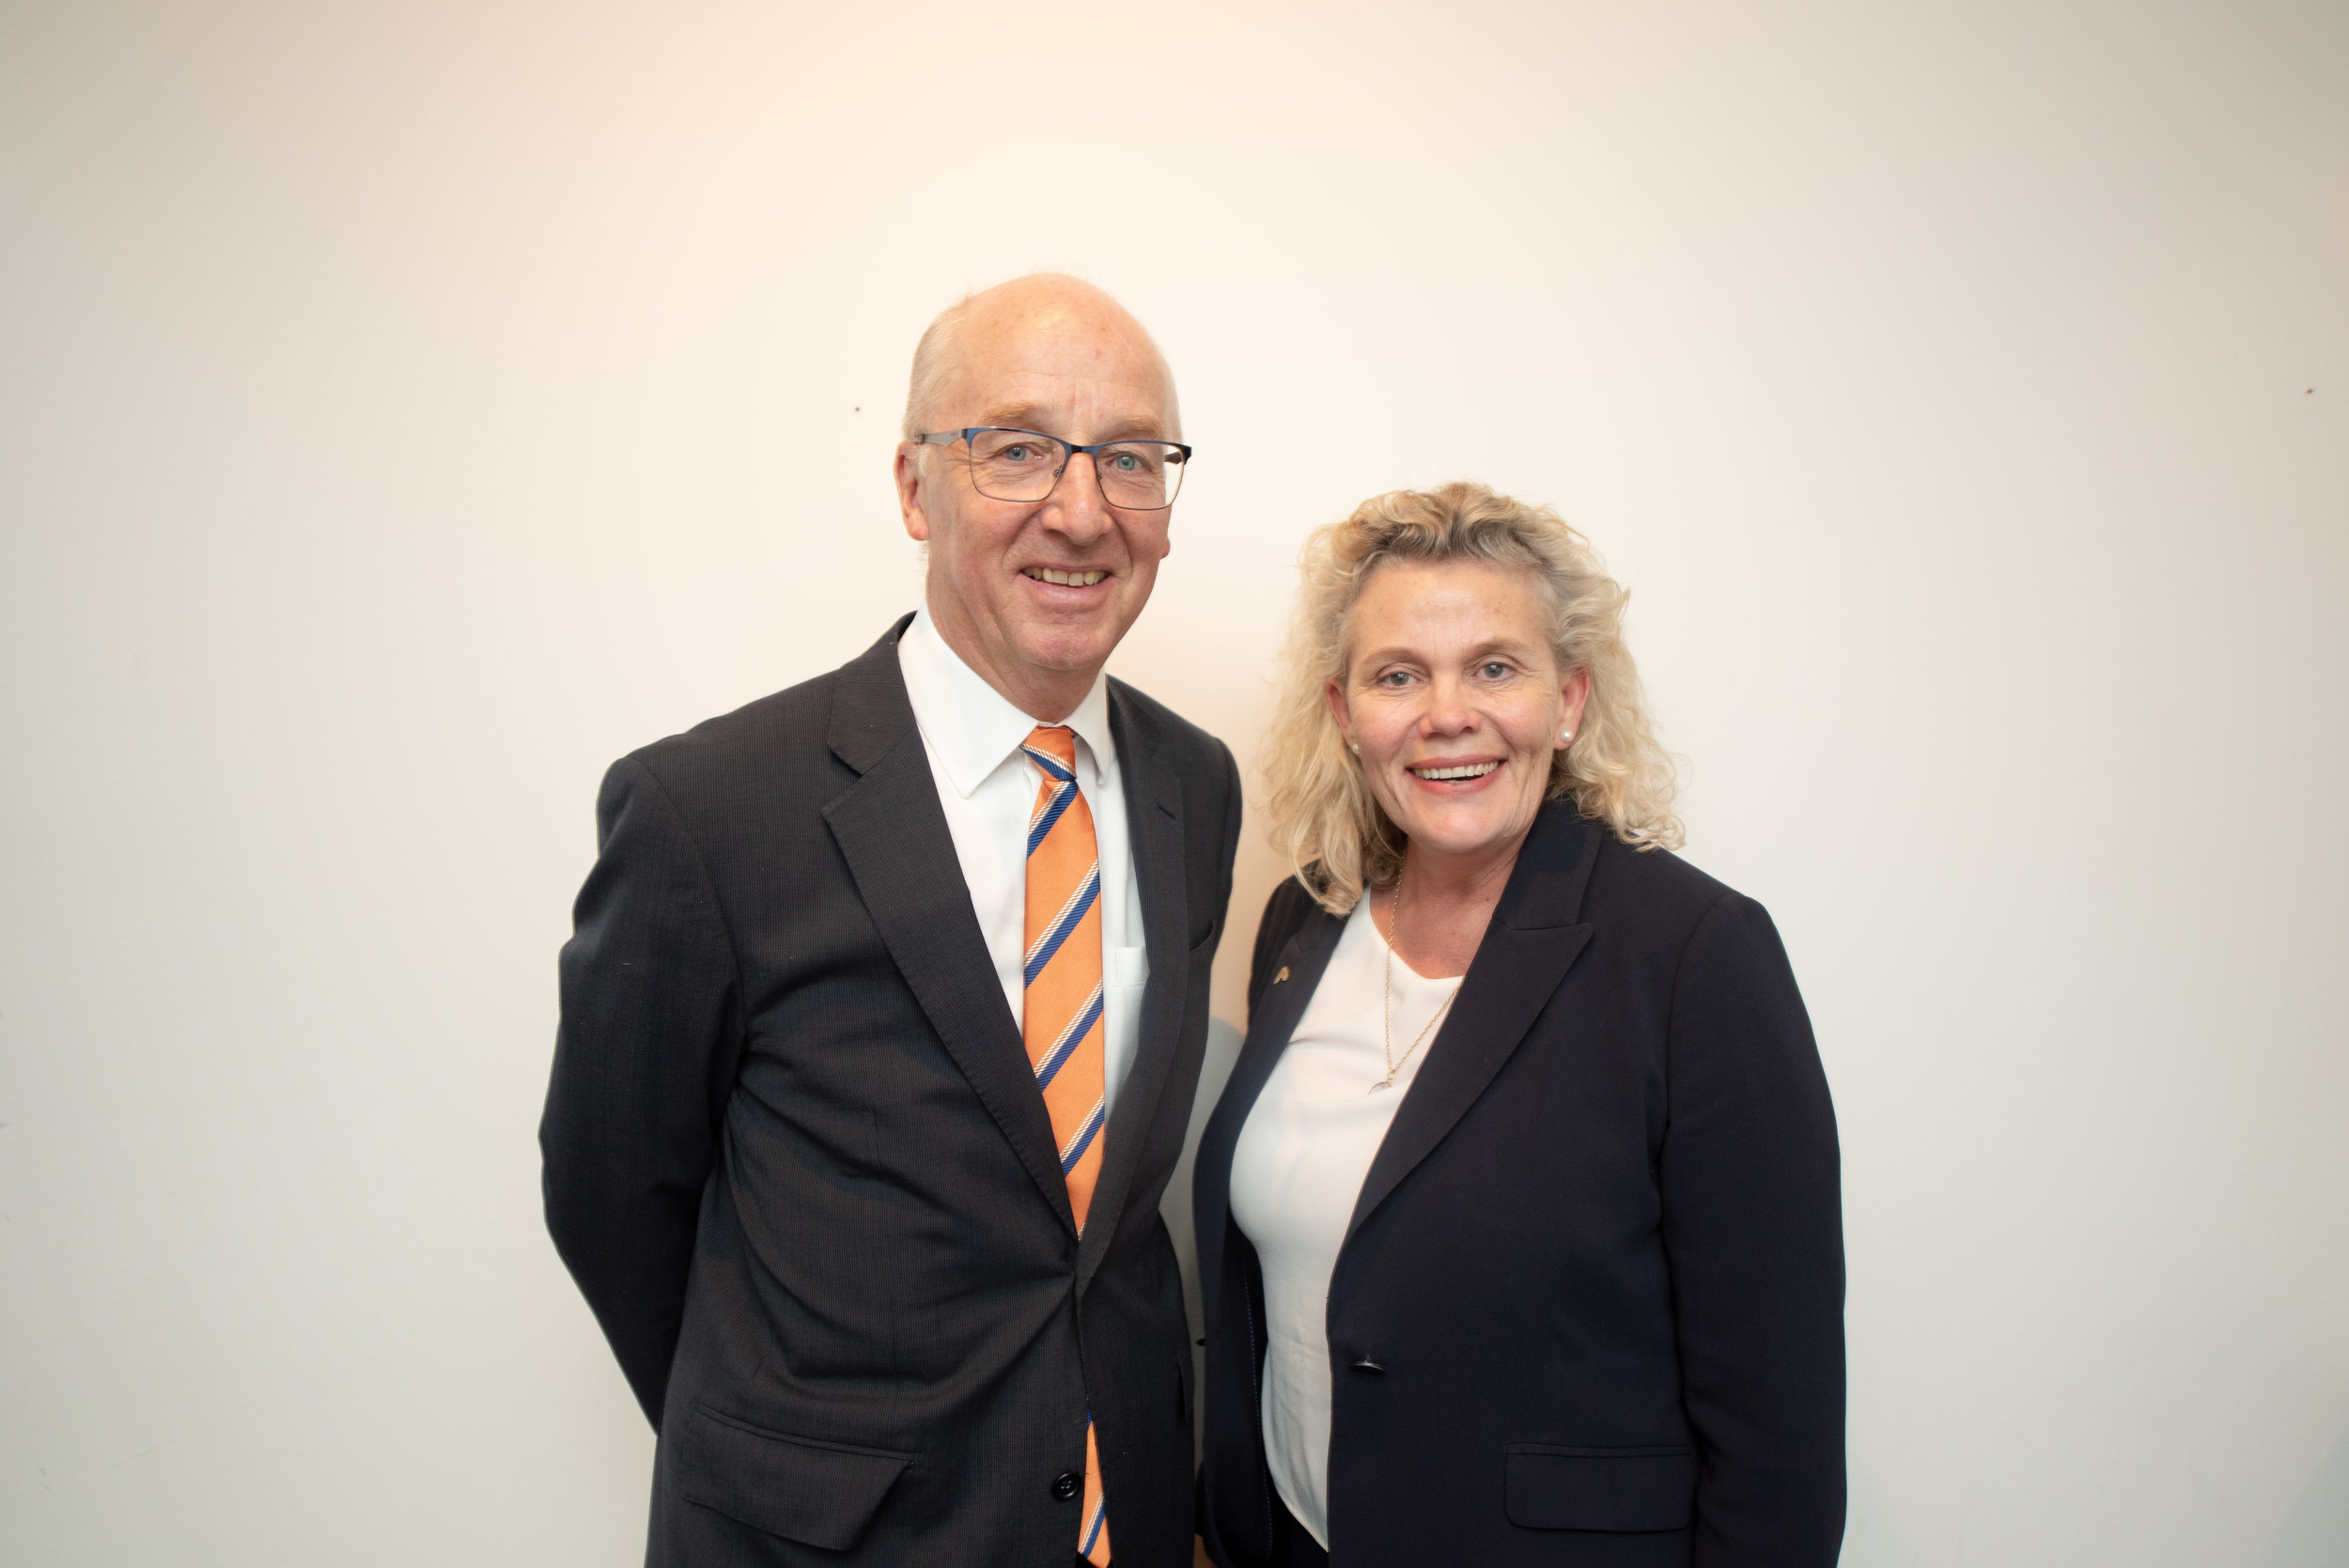  Business Leader of the Year 2018 - Fiona Simson, President of National Farmers’ Federation, with Ben Scheltus, CEO Climate Alliance. 